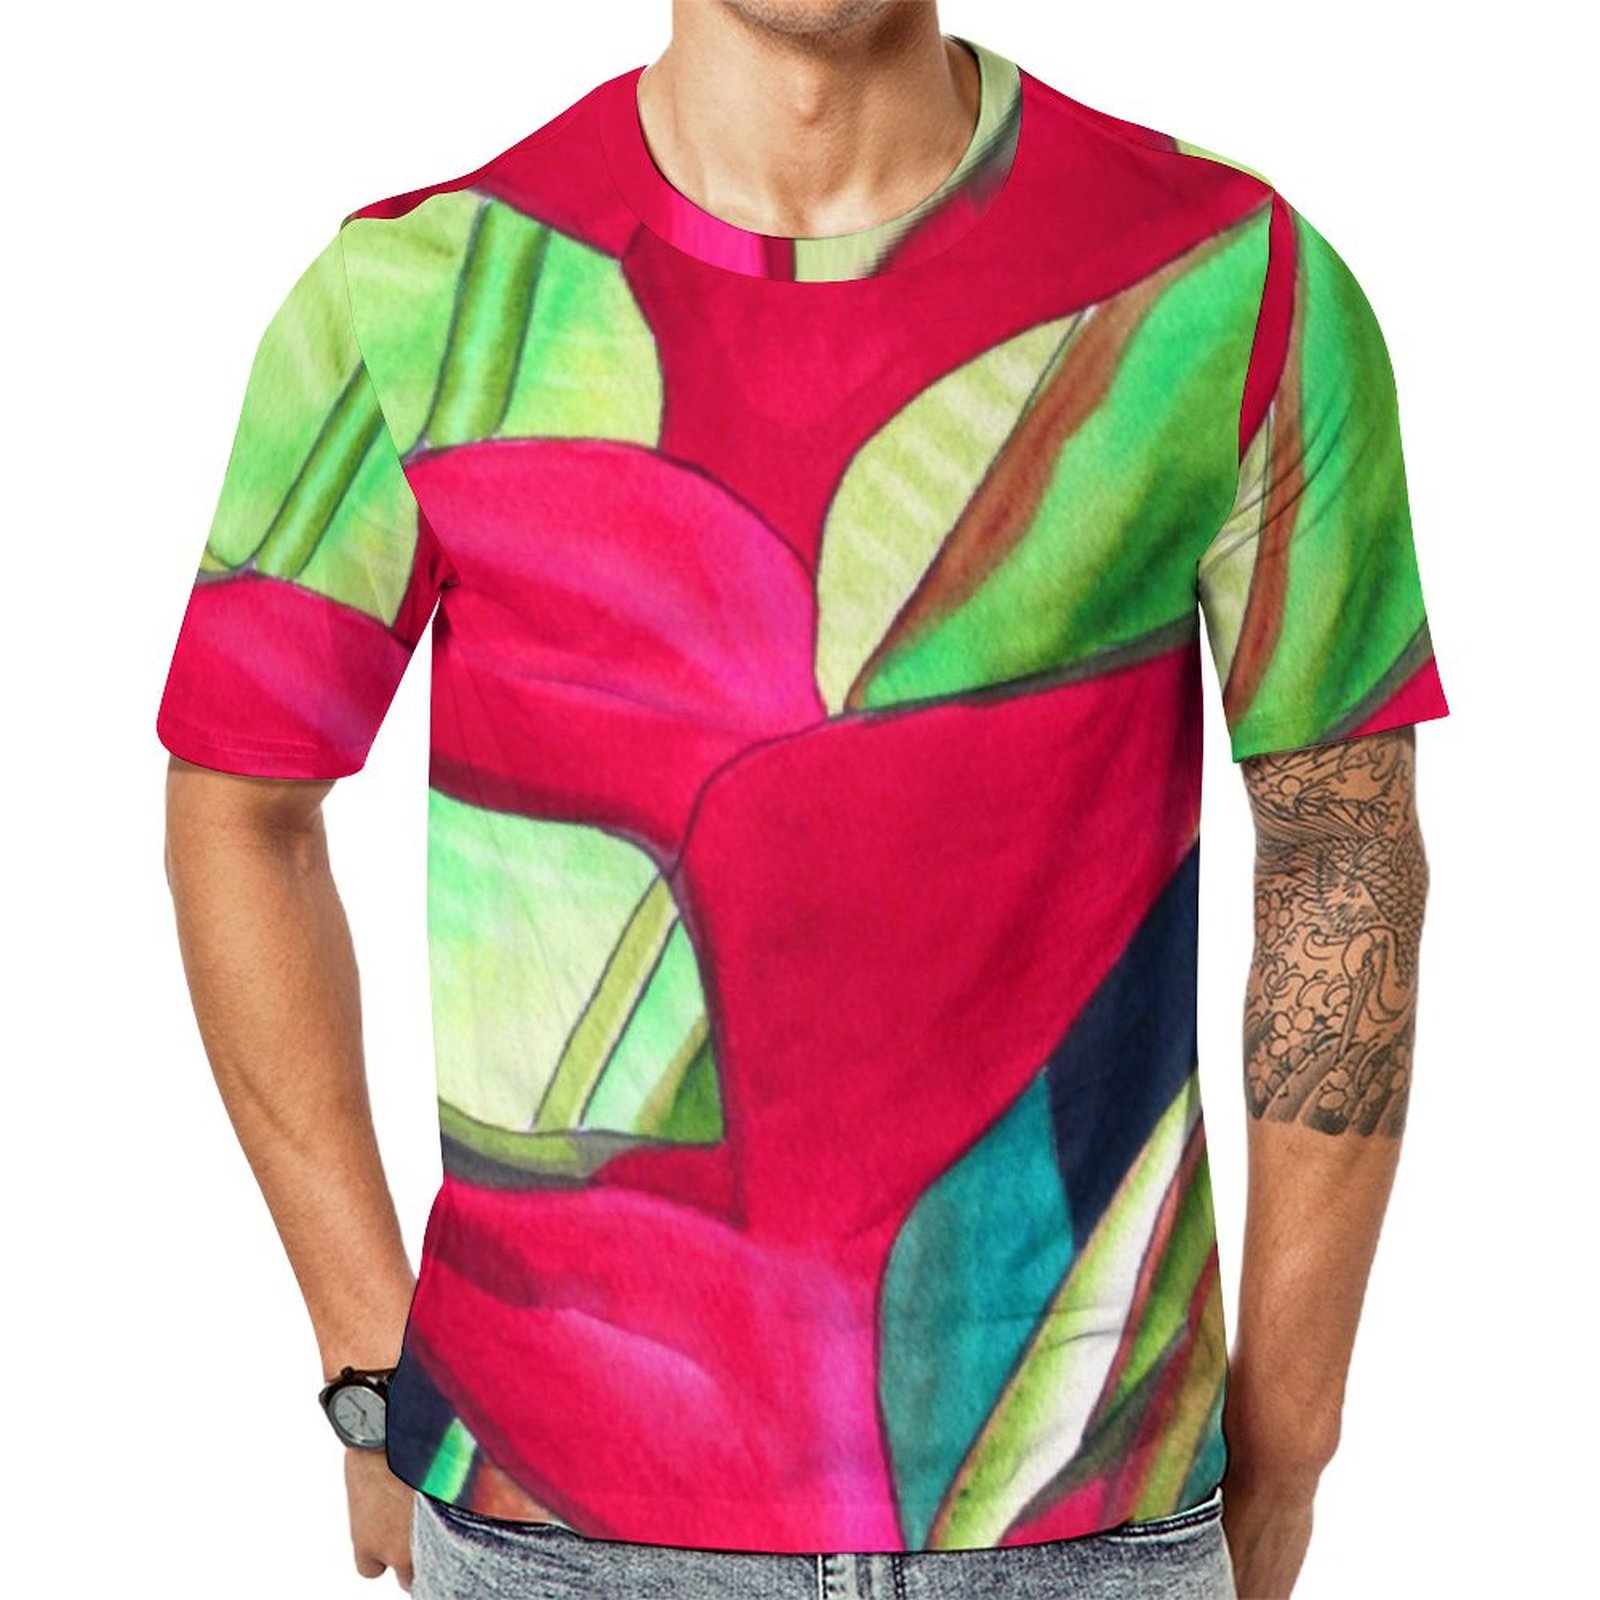 Lobster Claw Heliconia Tropical Flower Art Short Sleeve Print Unisex Tshirt Summer Casual Tees for Men and Women Coolcoshirts